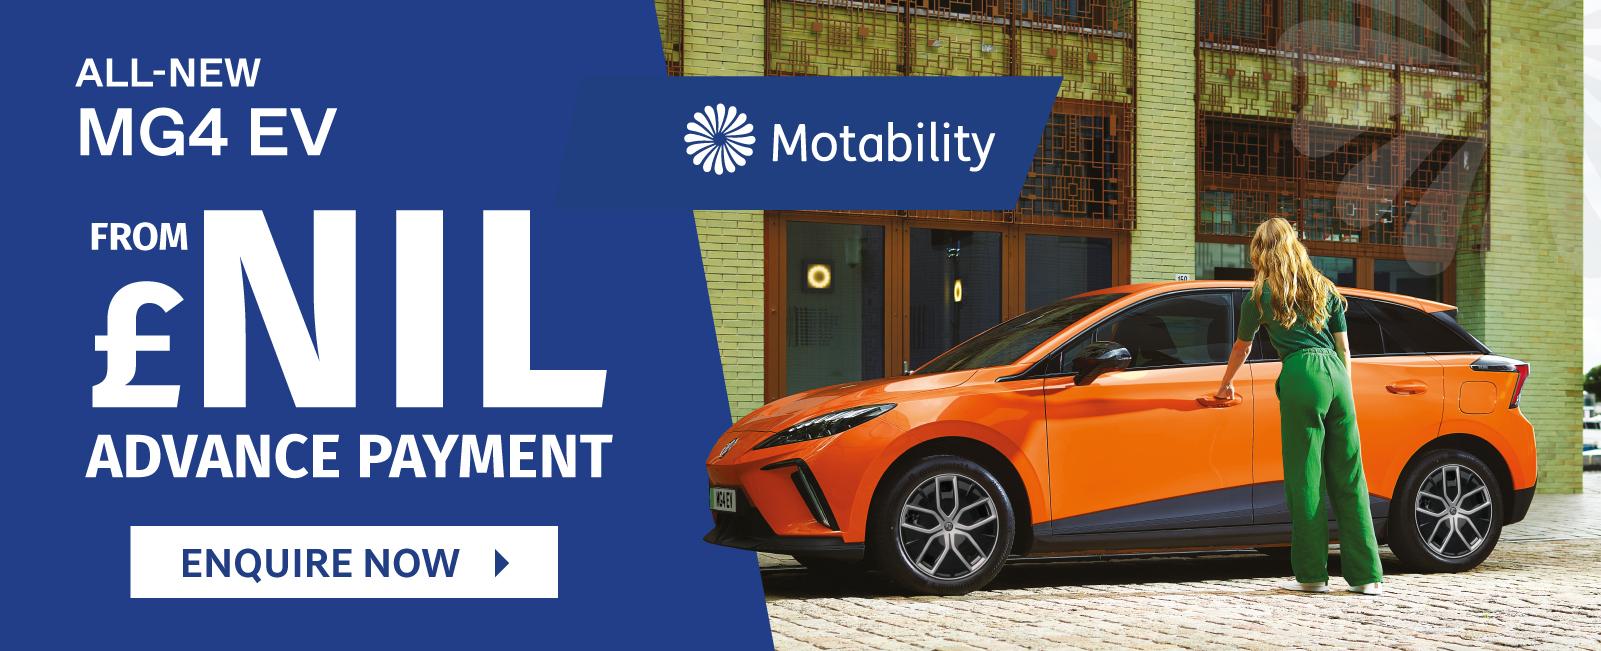 The MG4 EV on Motability Scheme from £NIL Advance Payment